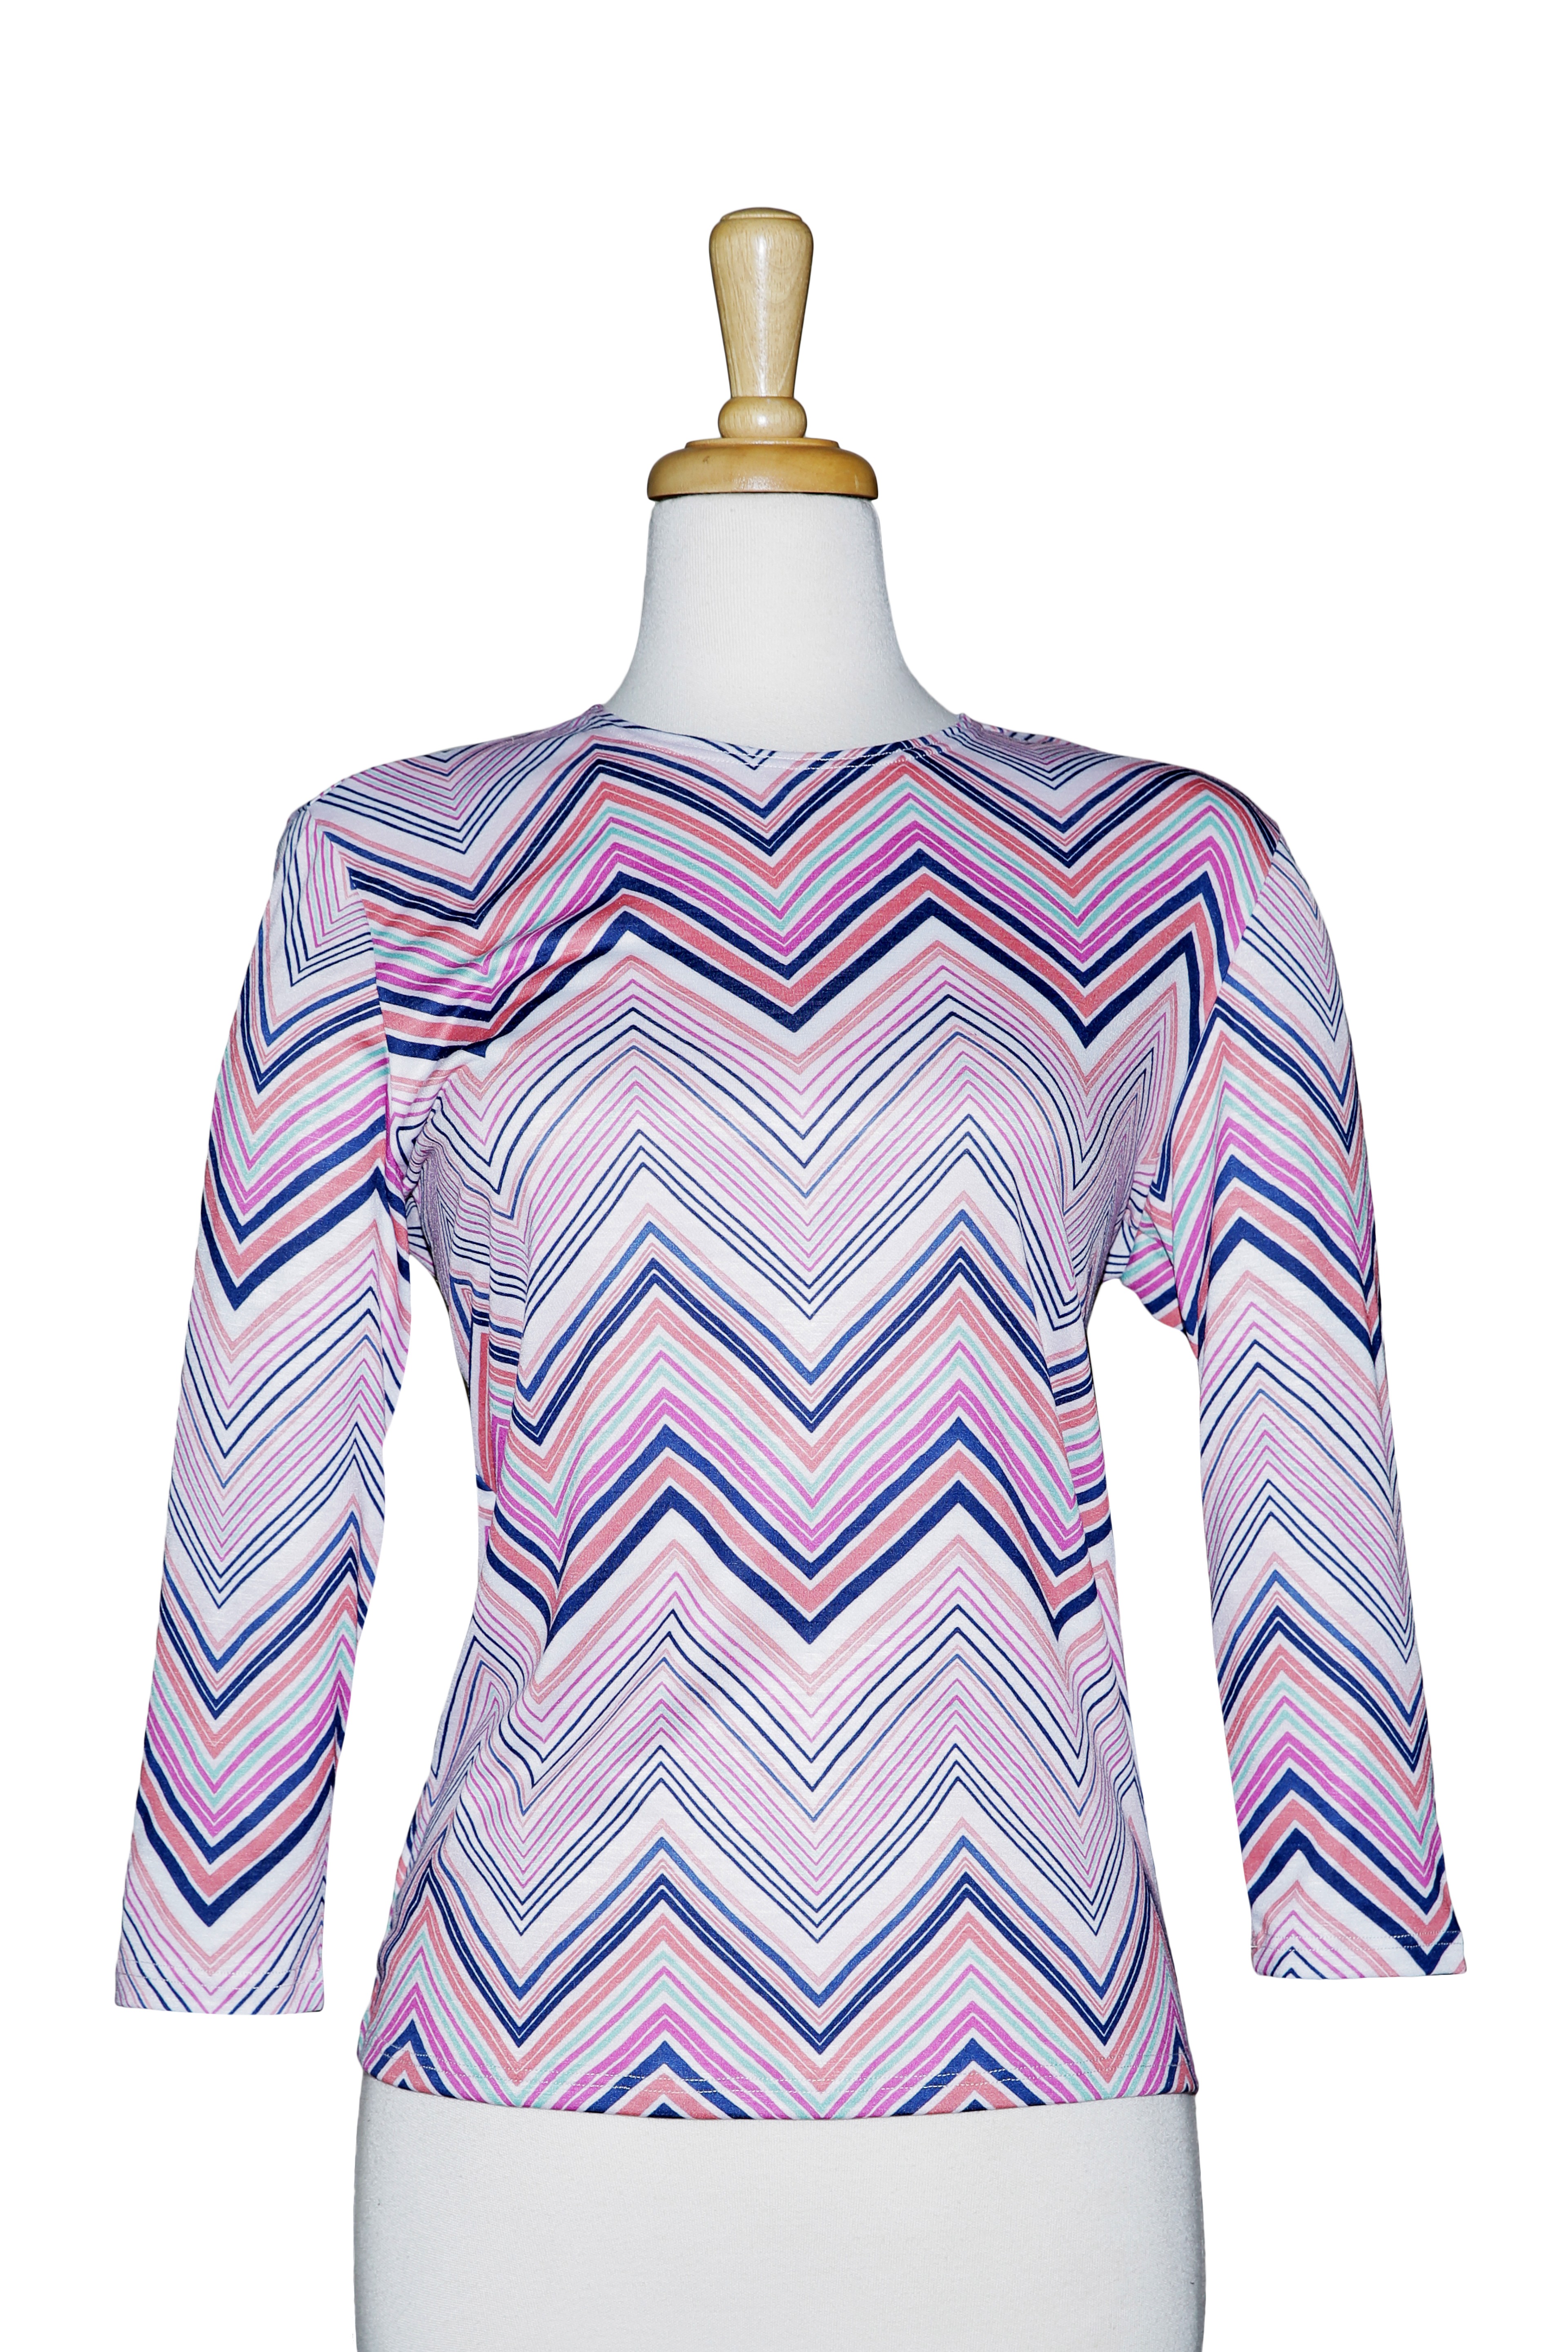 Plus Size Shades Of Blue And Pink Zig Zag 3/4 Sleeve  Cotton Top 